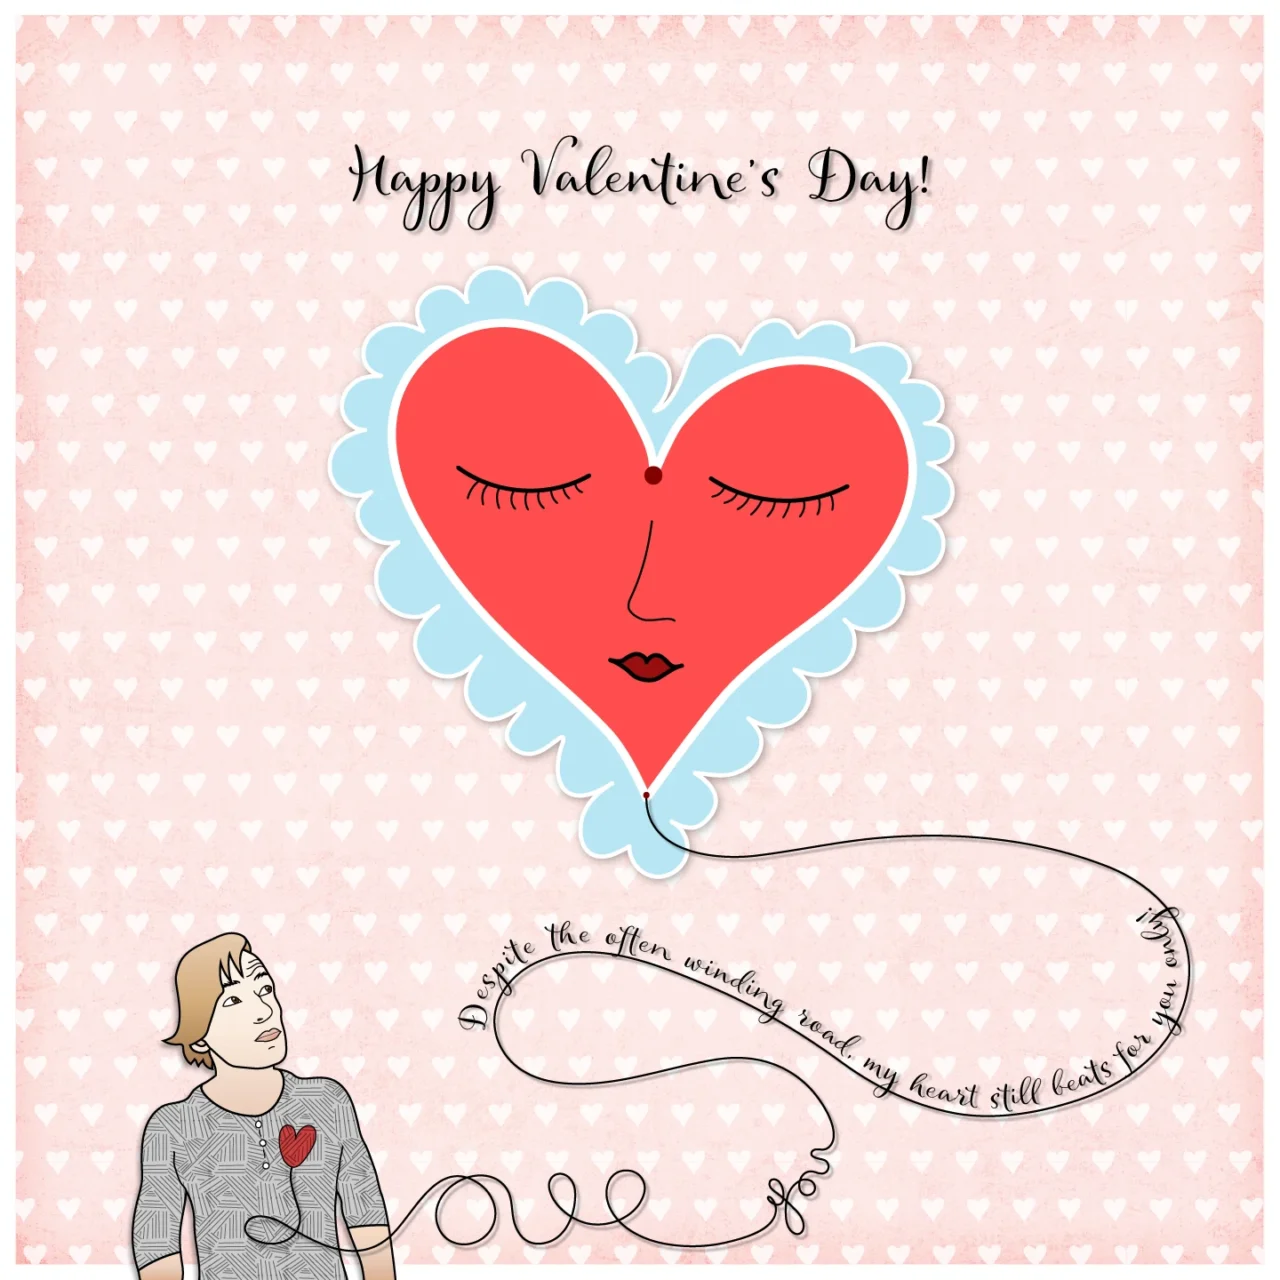 A valentines card design depicting big red heart in the middle and a guy looking at it from below with a string of words from his heart saying "I love you. Despite the often winding road, my heart still beats for you only!"